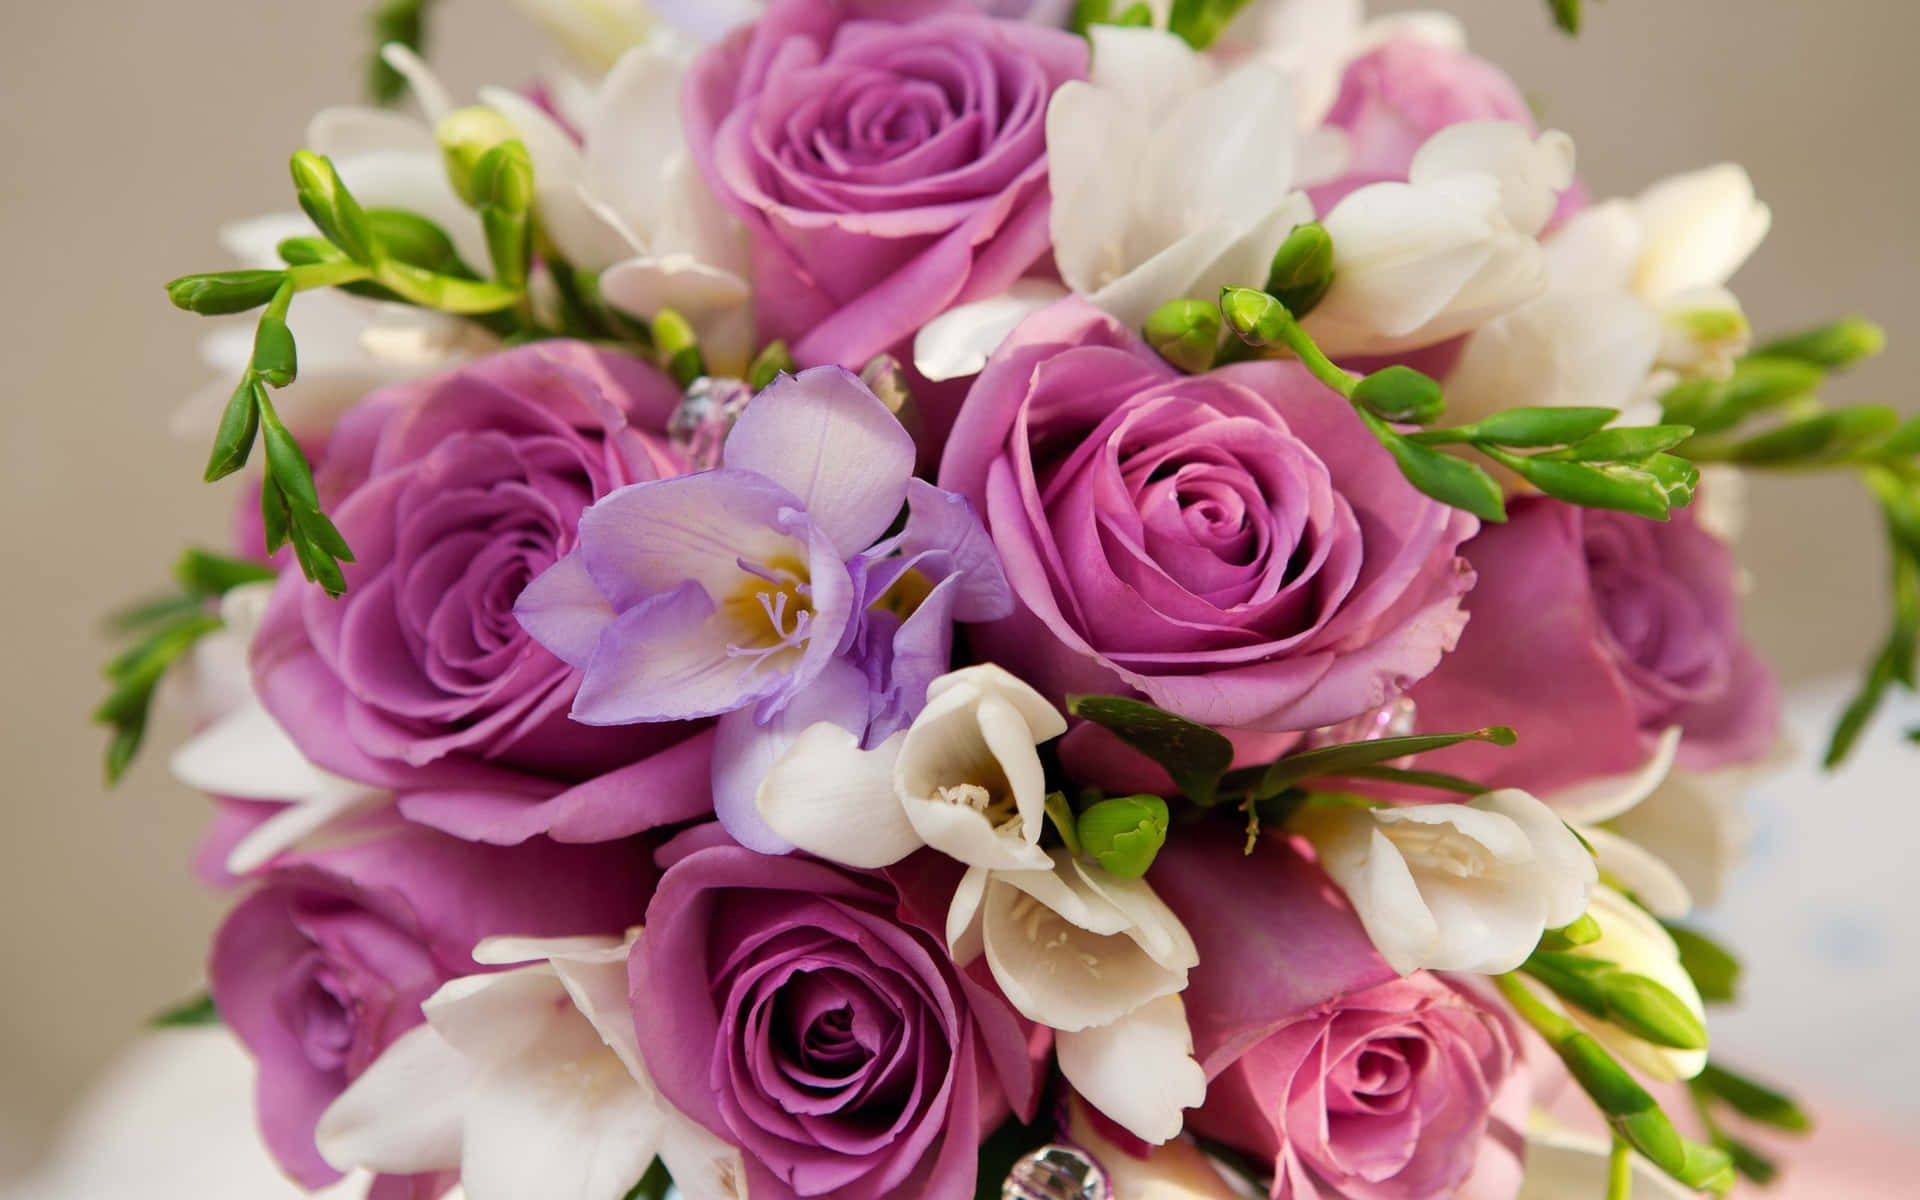 A Bouquet Of Purple Roses And White Orchids